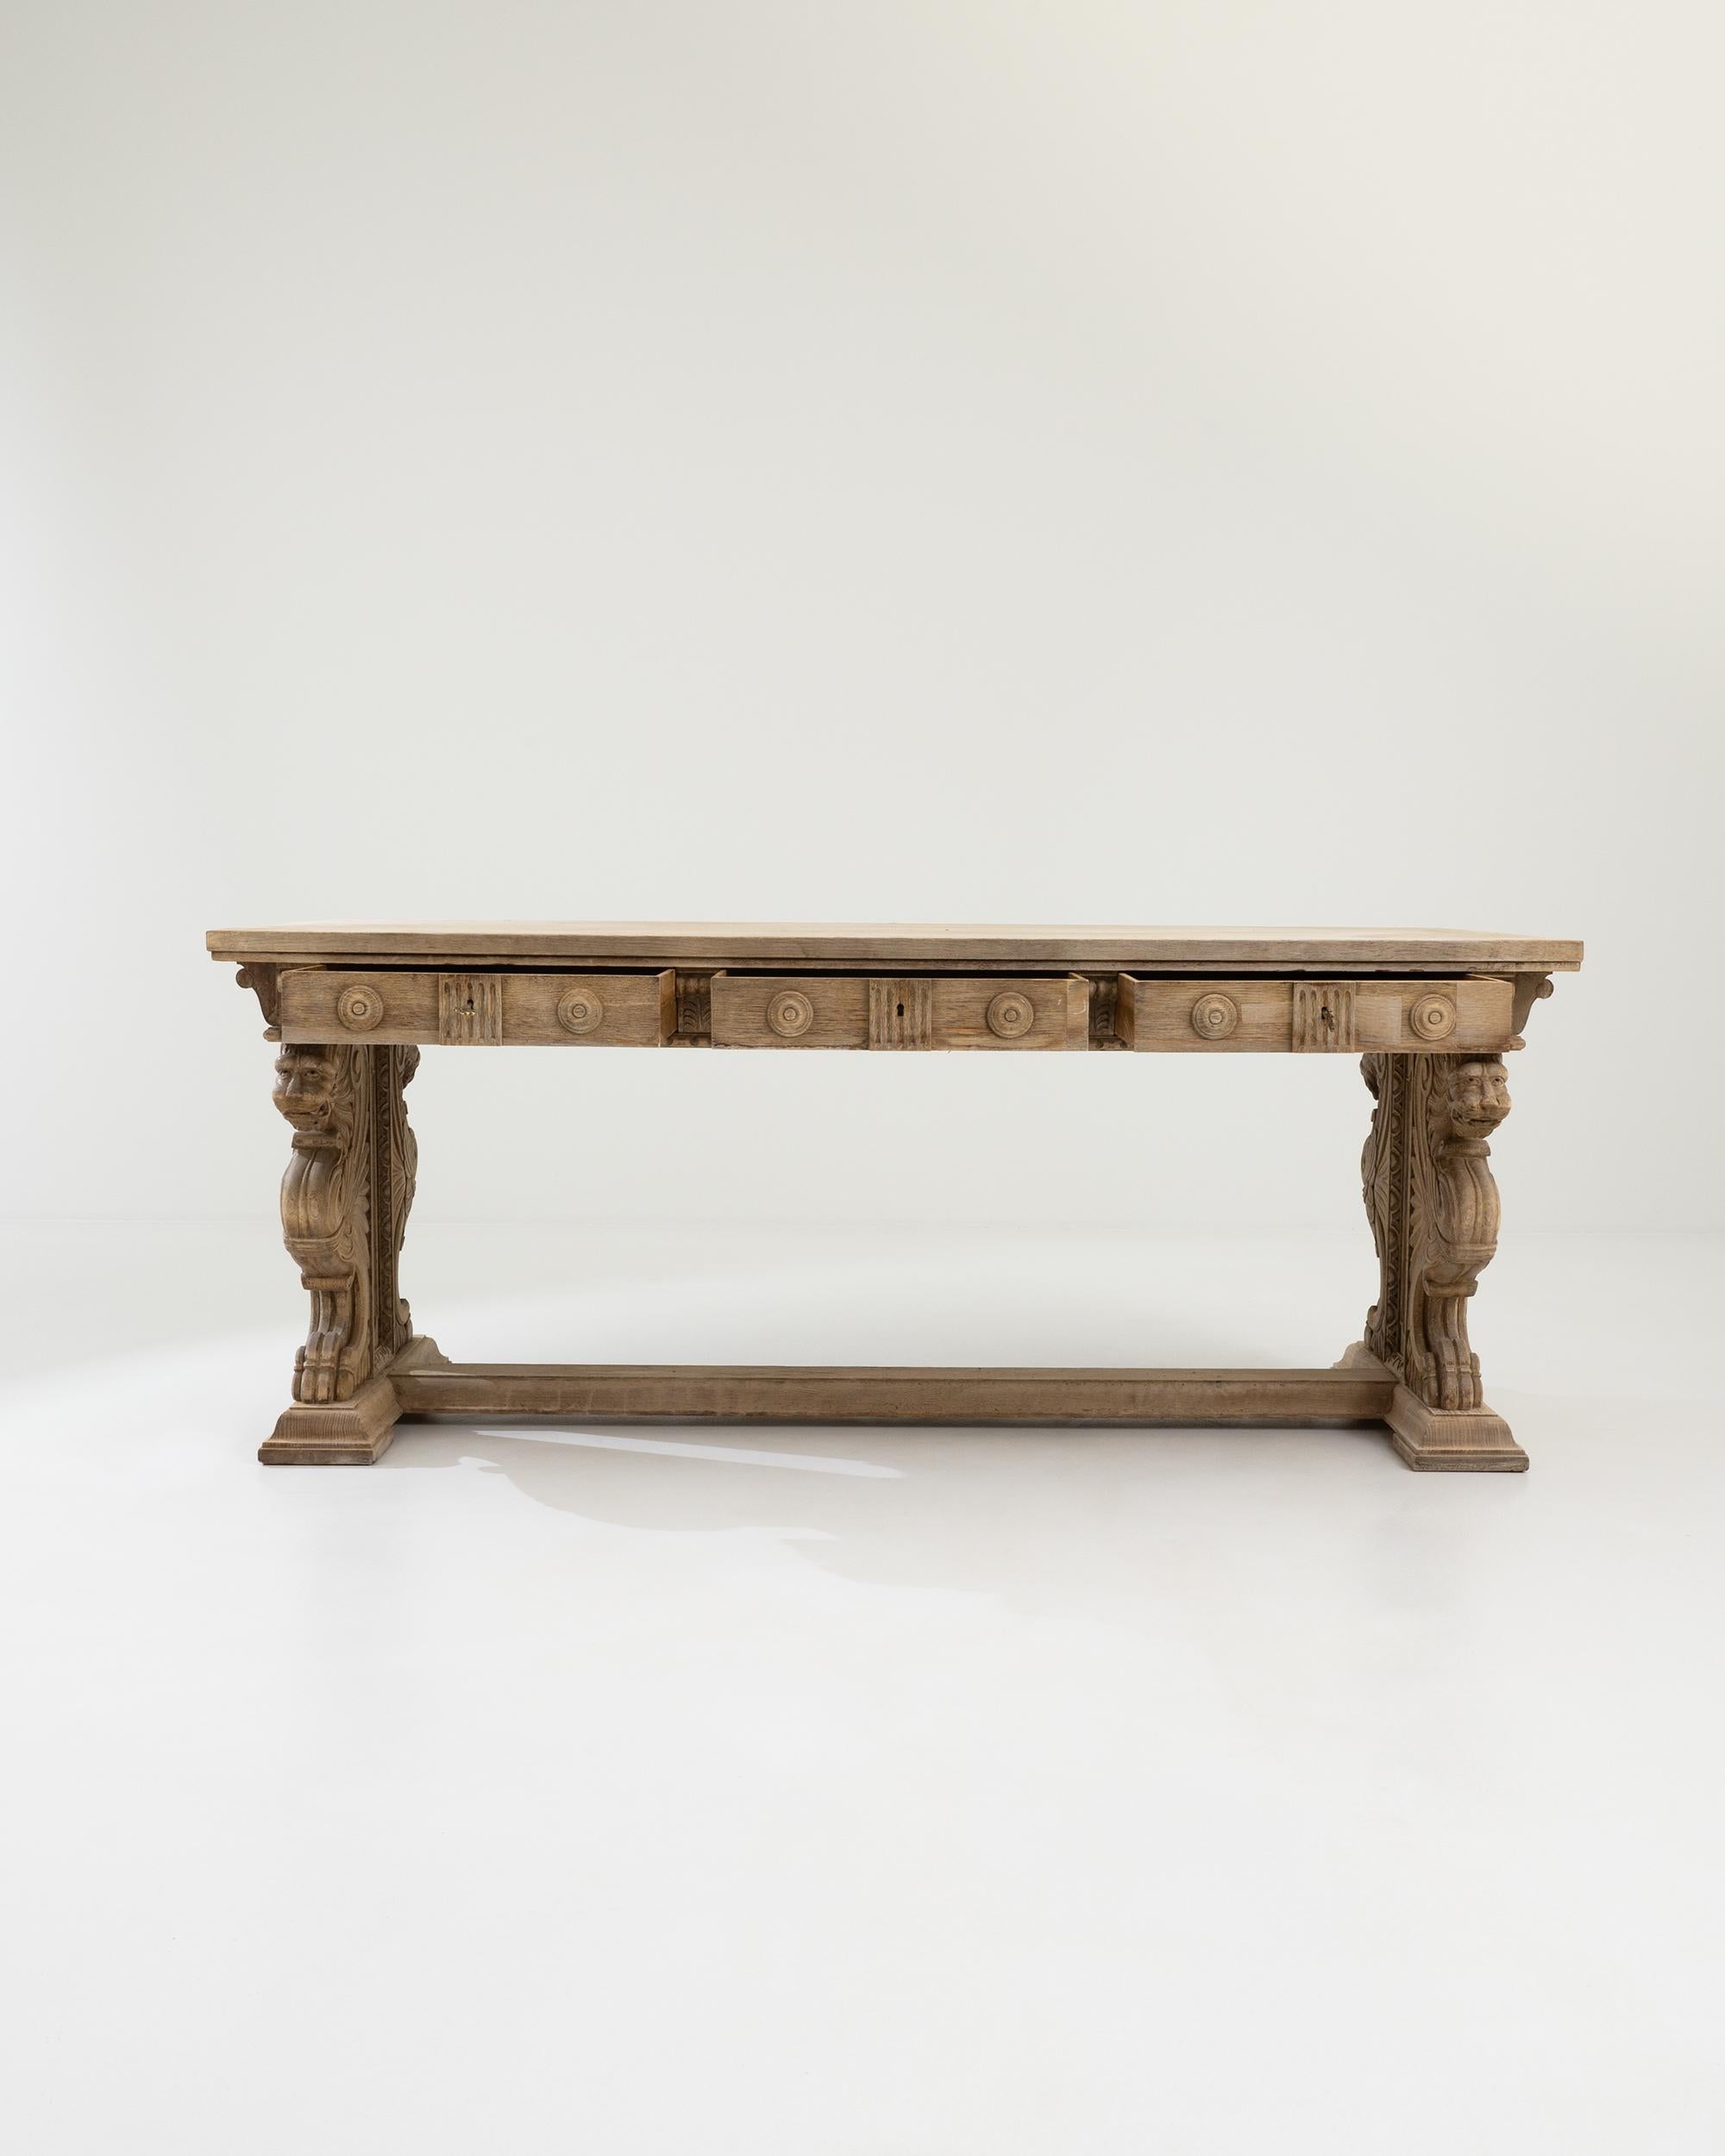 Majestic and beautifully crafted, this vintage oak dining table makes a one-of-a-kind centerpiece. Hand-built in Italy in the 20th century, the design recalls the ornate furniture of Renaissance palaces and villas. The trestle legs are carved into